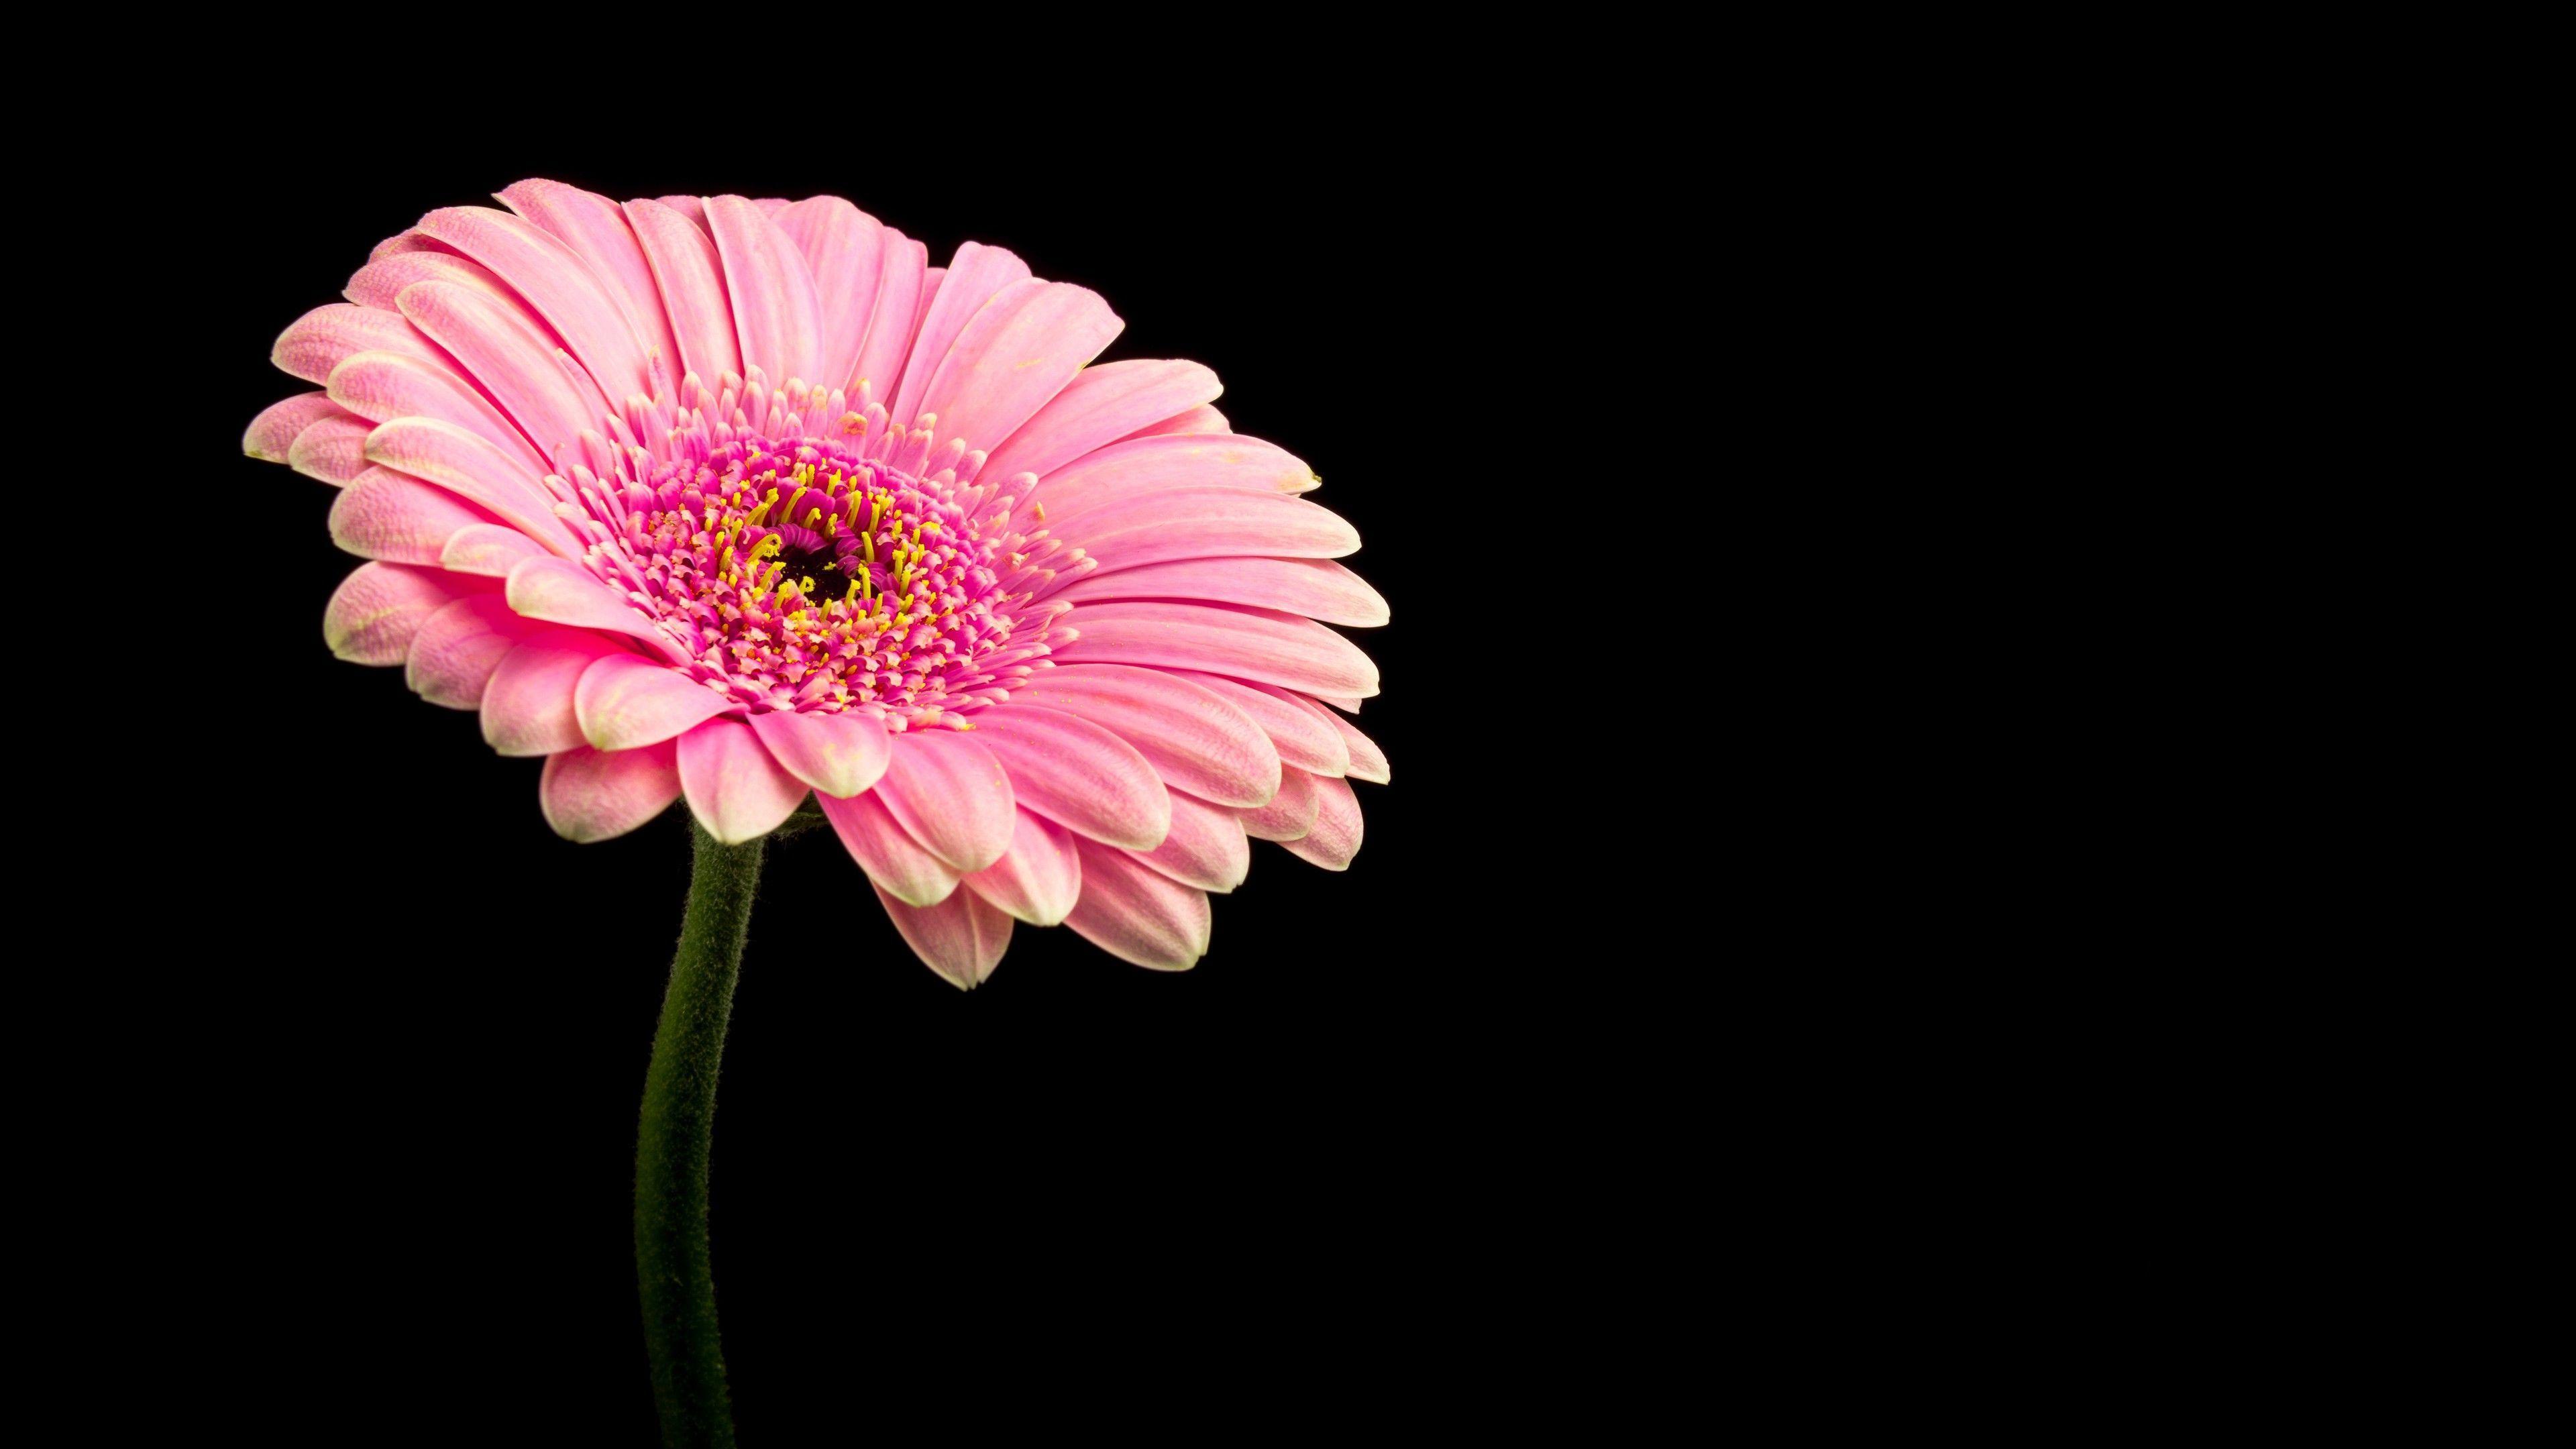 Download latest Pink Daisy Flower 4K Wallpaper, image, picture